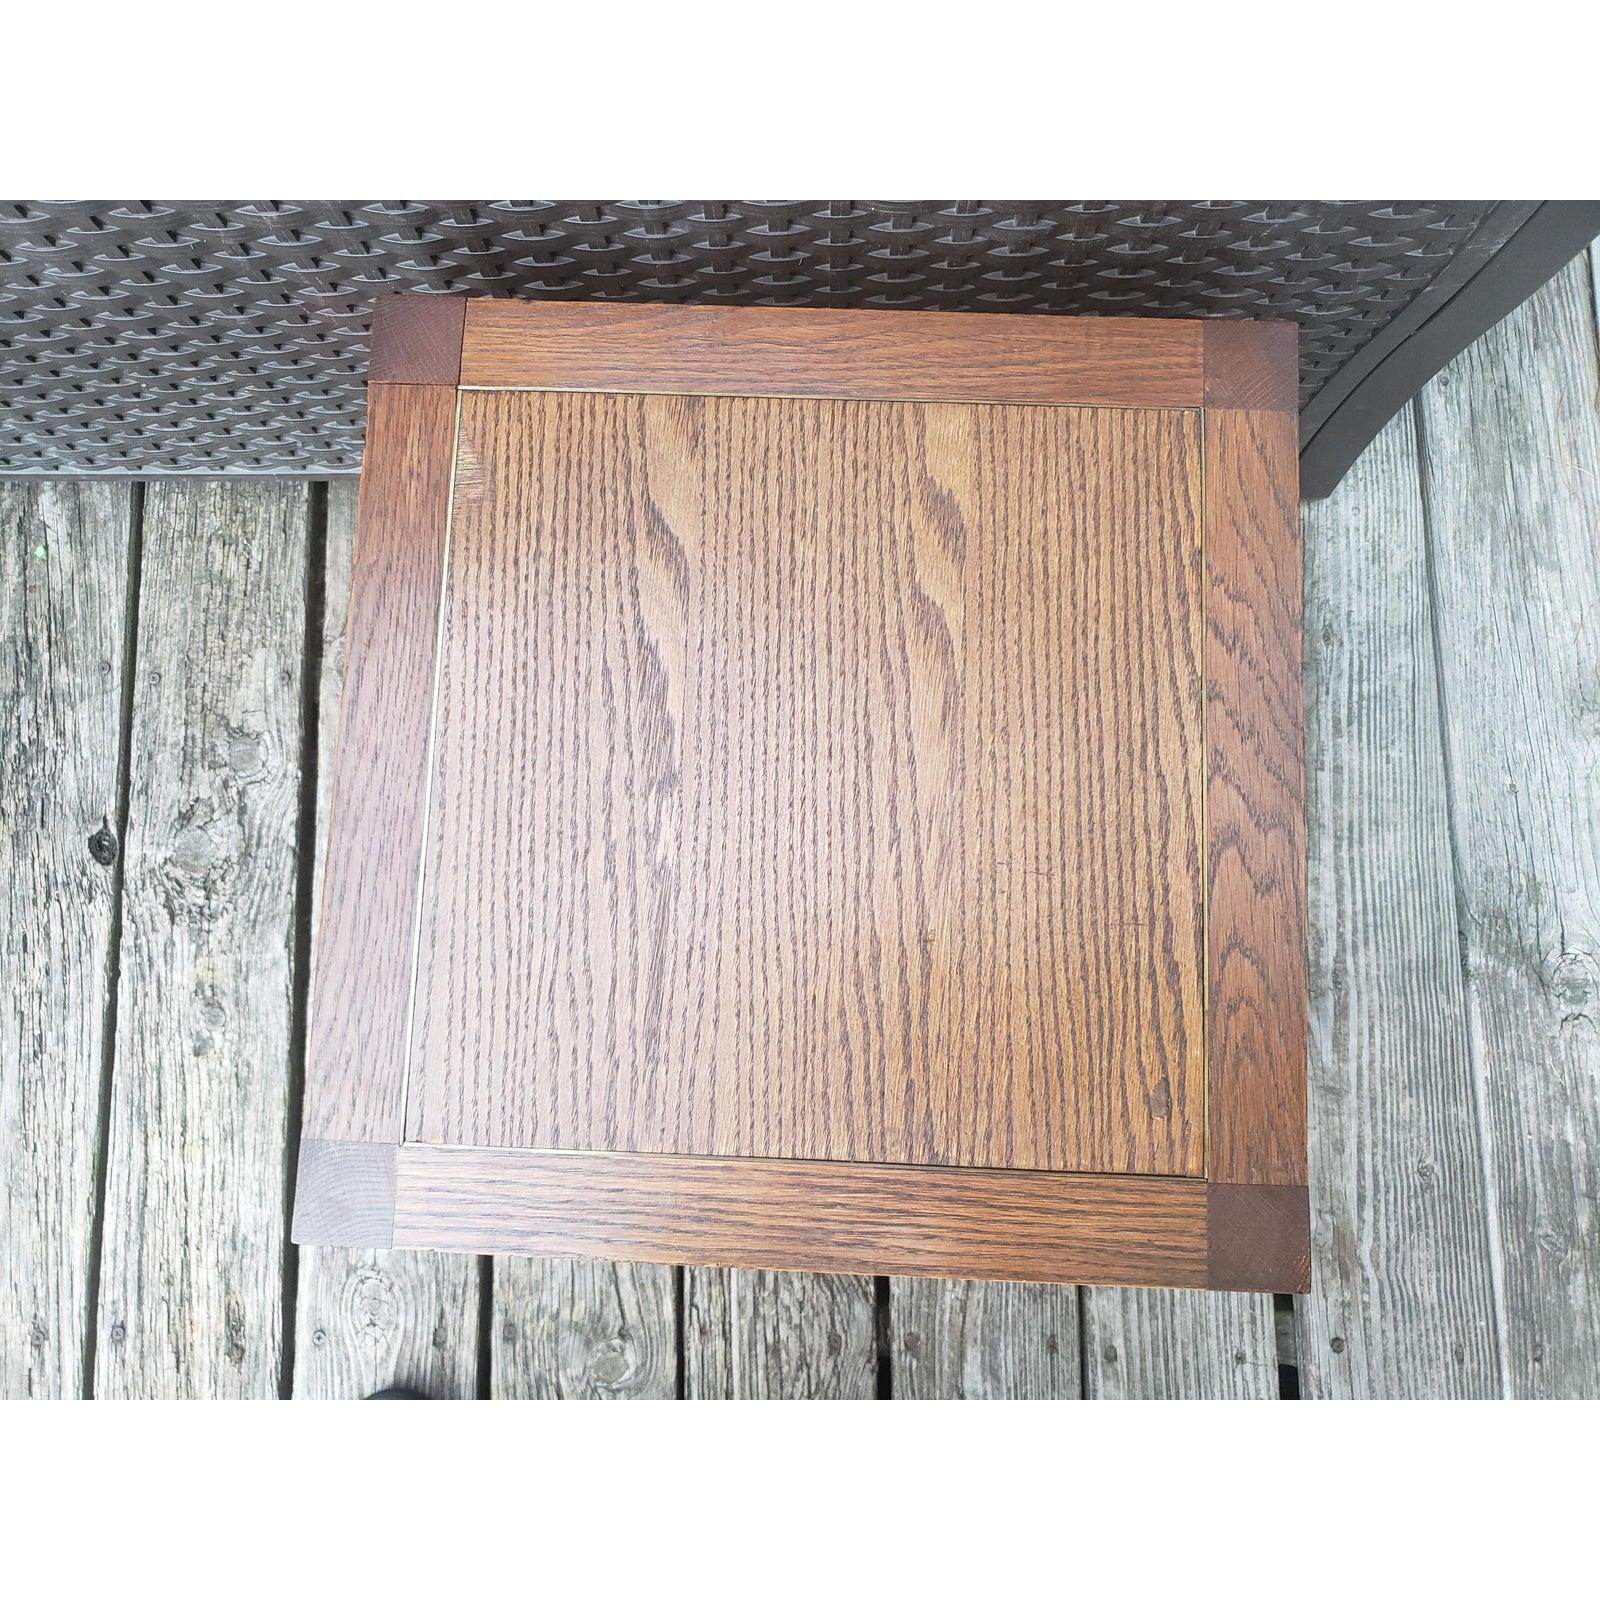 Campaign Vintage Traditional Solid Red Oak Parsons Tables, a Pair For Sale